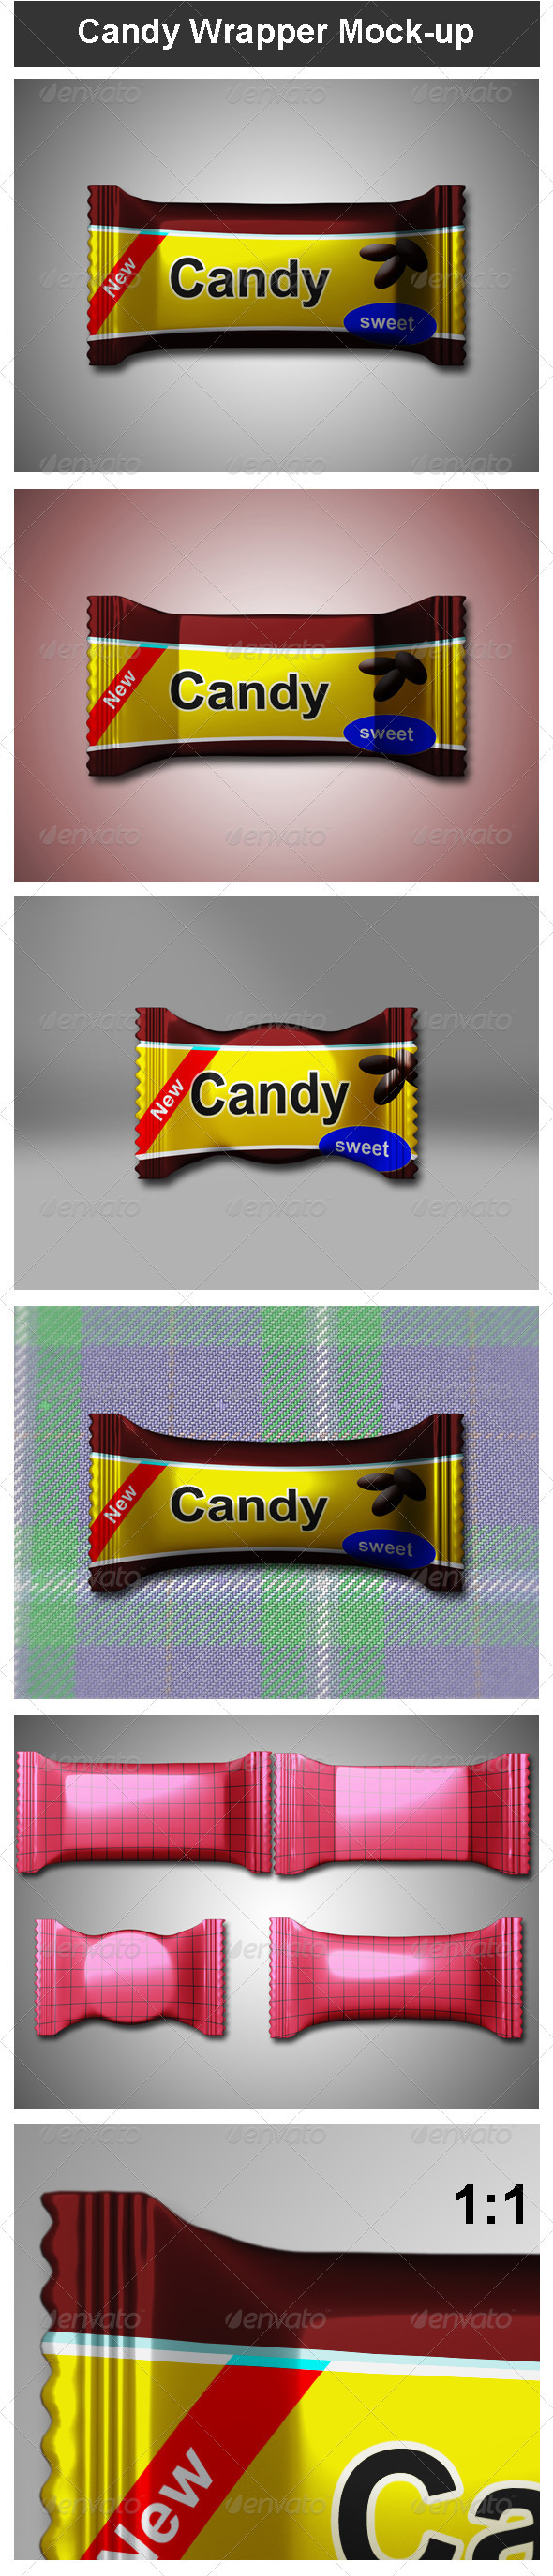 Download Candy Mockup Graphics Designs Templates From Graphicriver PSD Mockup Templates